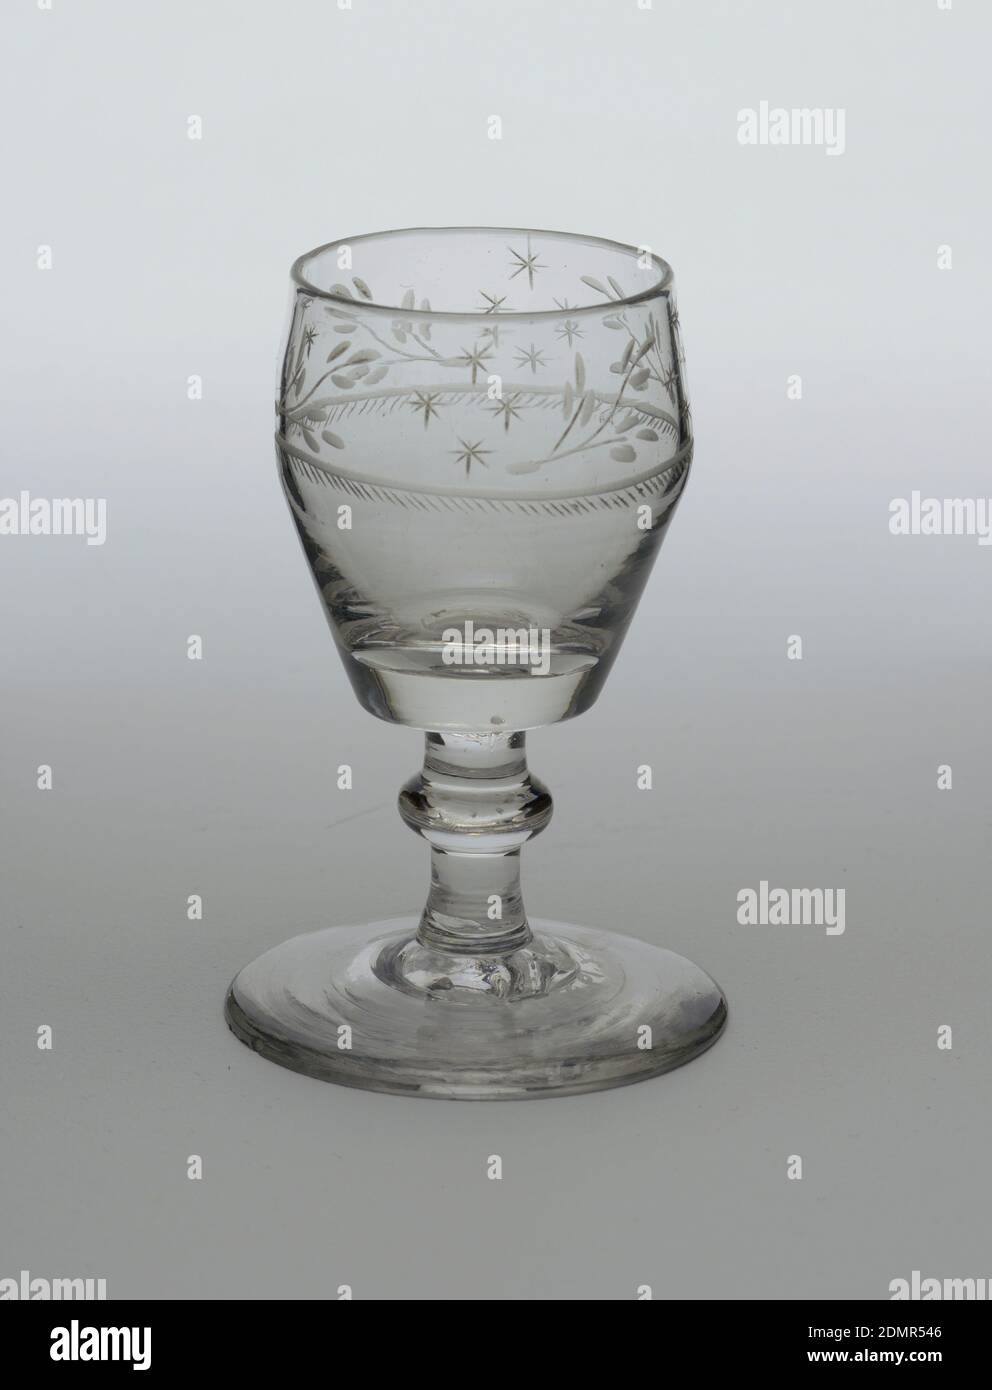 goblet, glass, Small, inverted pear-shaped bowl with flat bottom, short stem with flattened globular knop and broad, circular foot. Wheel engraved on upper part of bowl with alternating sprays and stars in groups of 4. Below, one ring and row of small hatch marks encircle bowl., Ireland, ca. 1810–25, glasswares, Decorative Arts, goblet Stock Photo